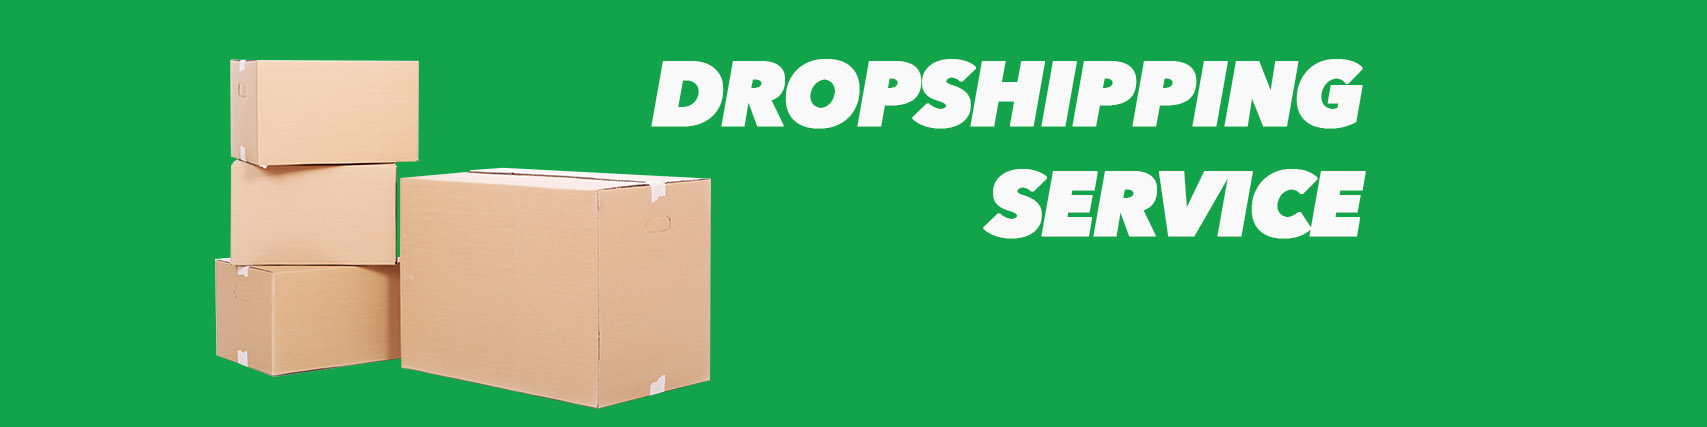 apple iphone dropshipping